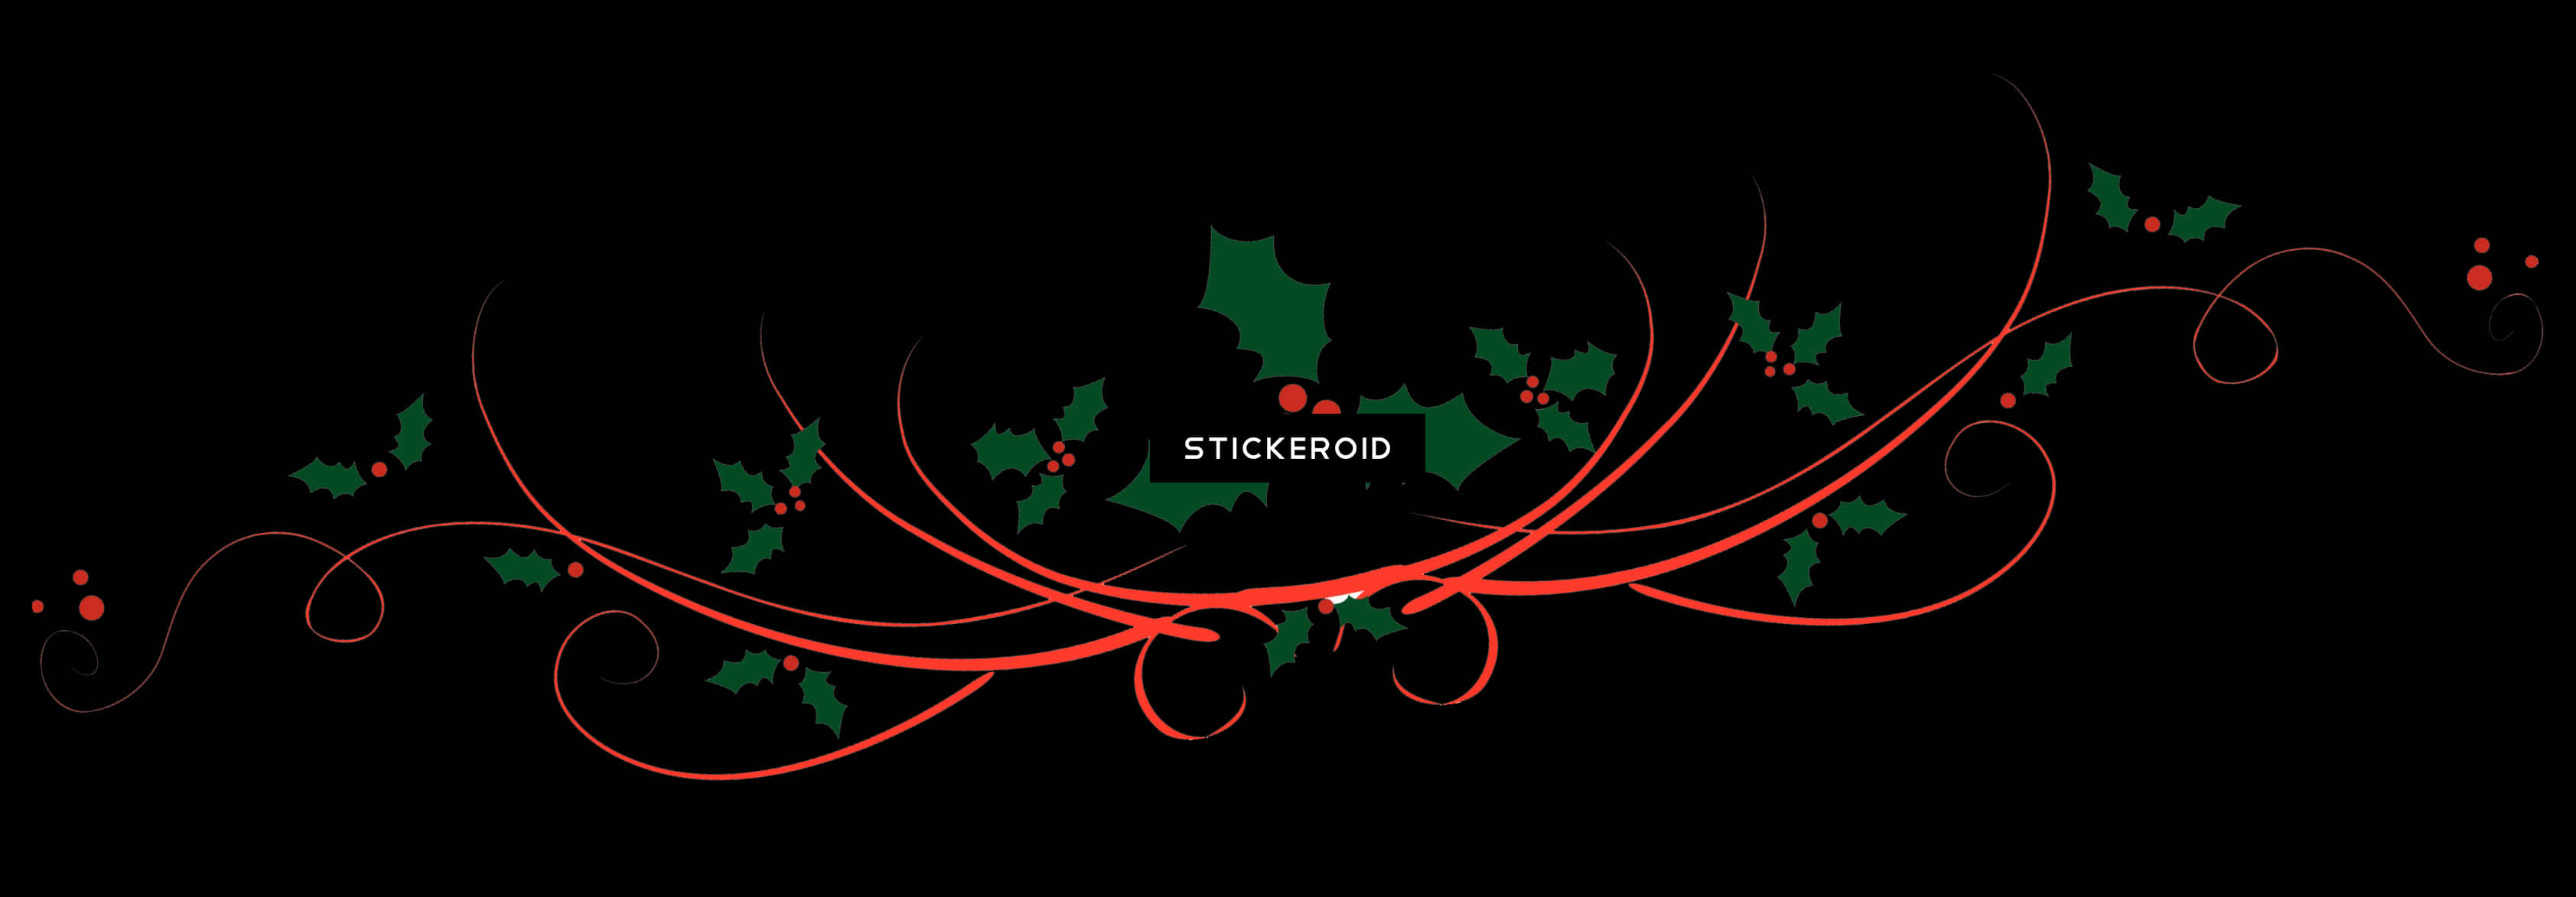 A Red And Green Design On A Black Background